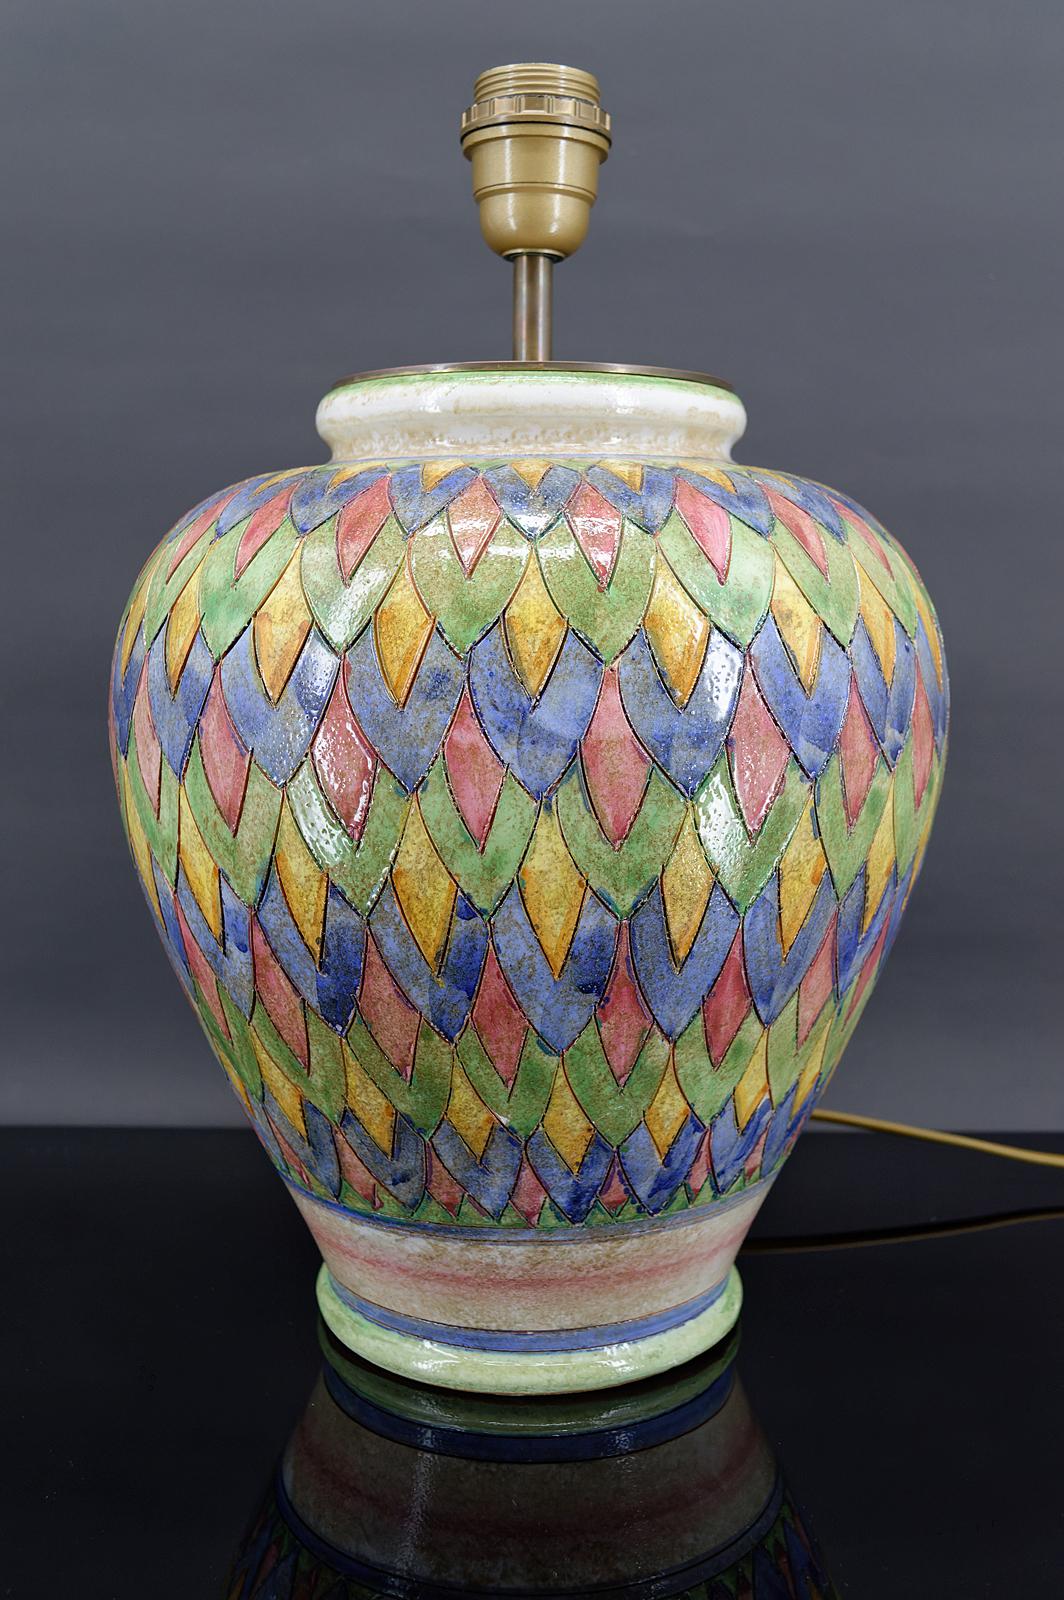 Deruta ceramic lamp.
Italy, circa 1970-1980

Peacock type plumage pattern.

Signed.
In very good condition, electricity OK.

Dimensions:
height 42 cm
diameter 30 cm